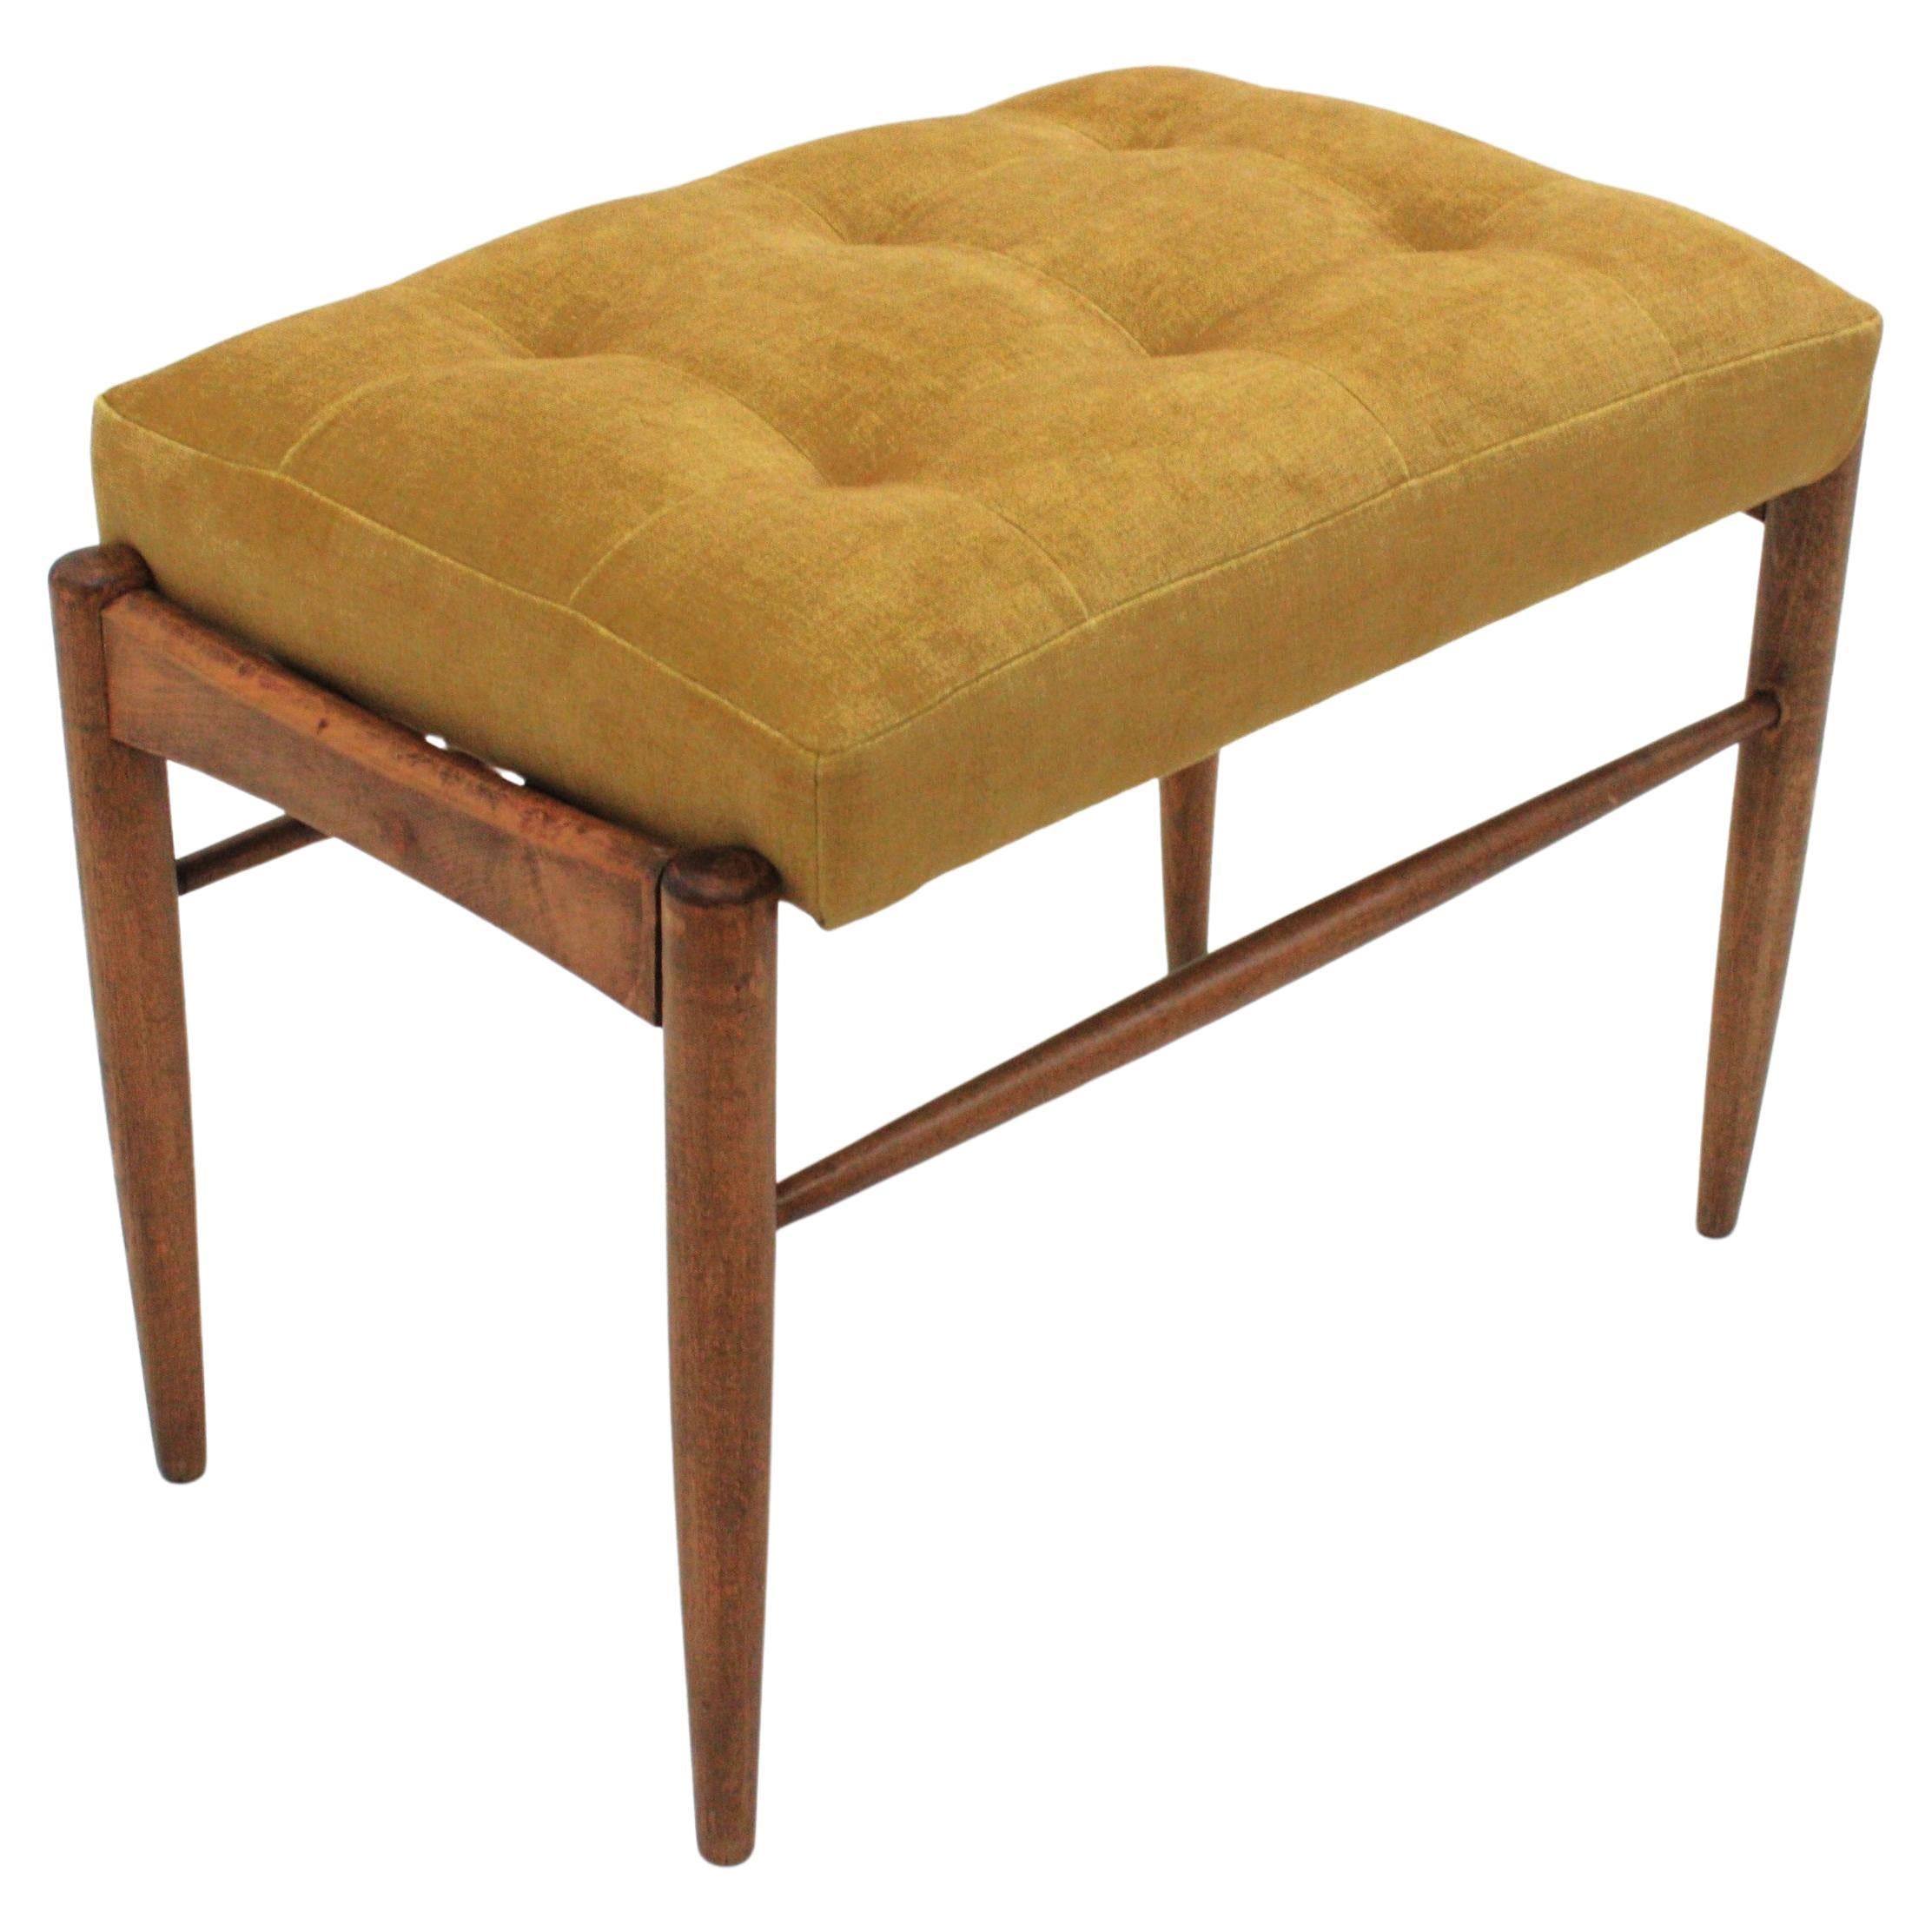 Scandinavian Modern Stool Ottoman or Bench New Upholstered in Yellow Chenille For Sale